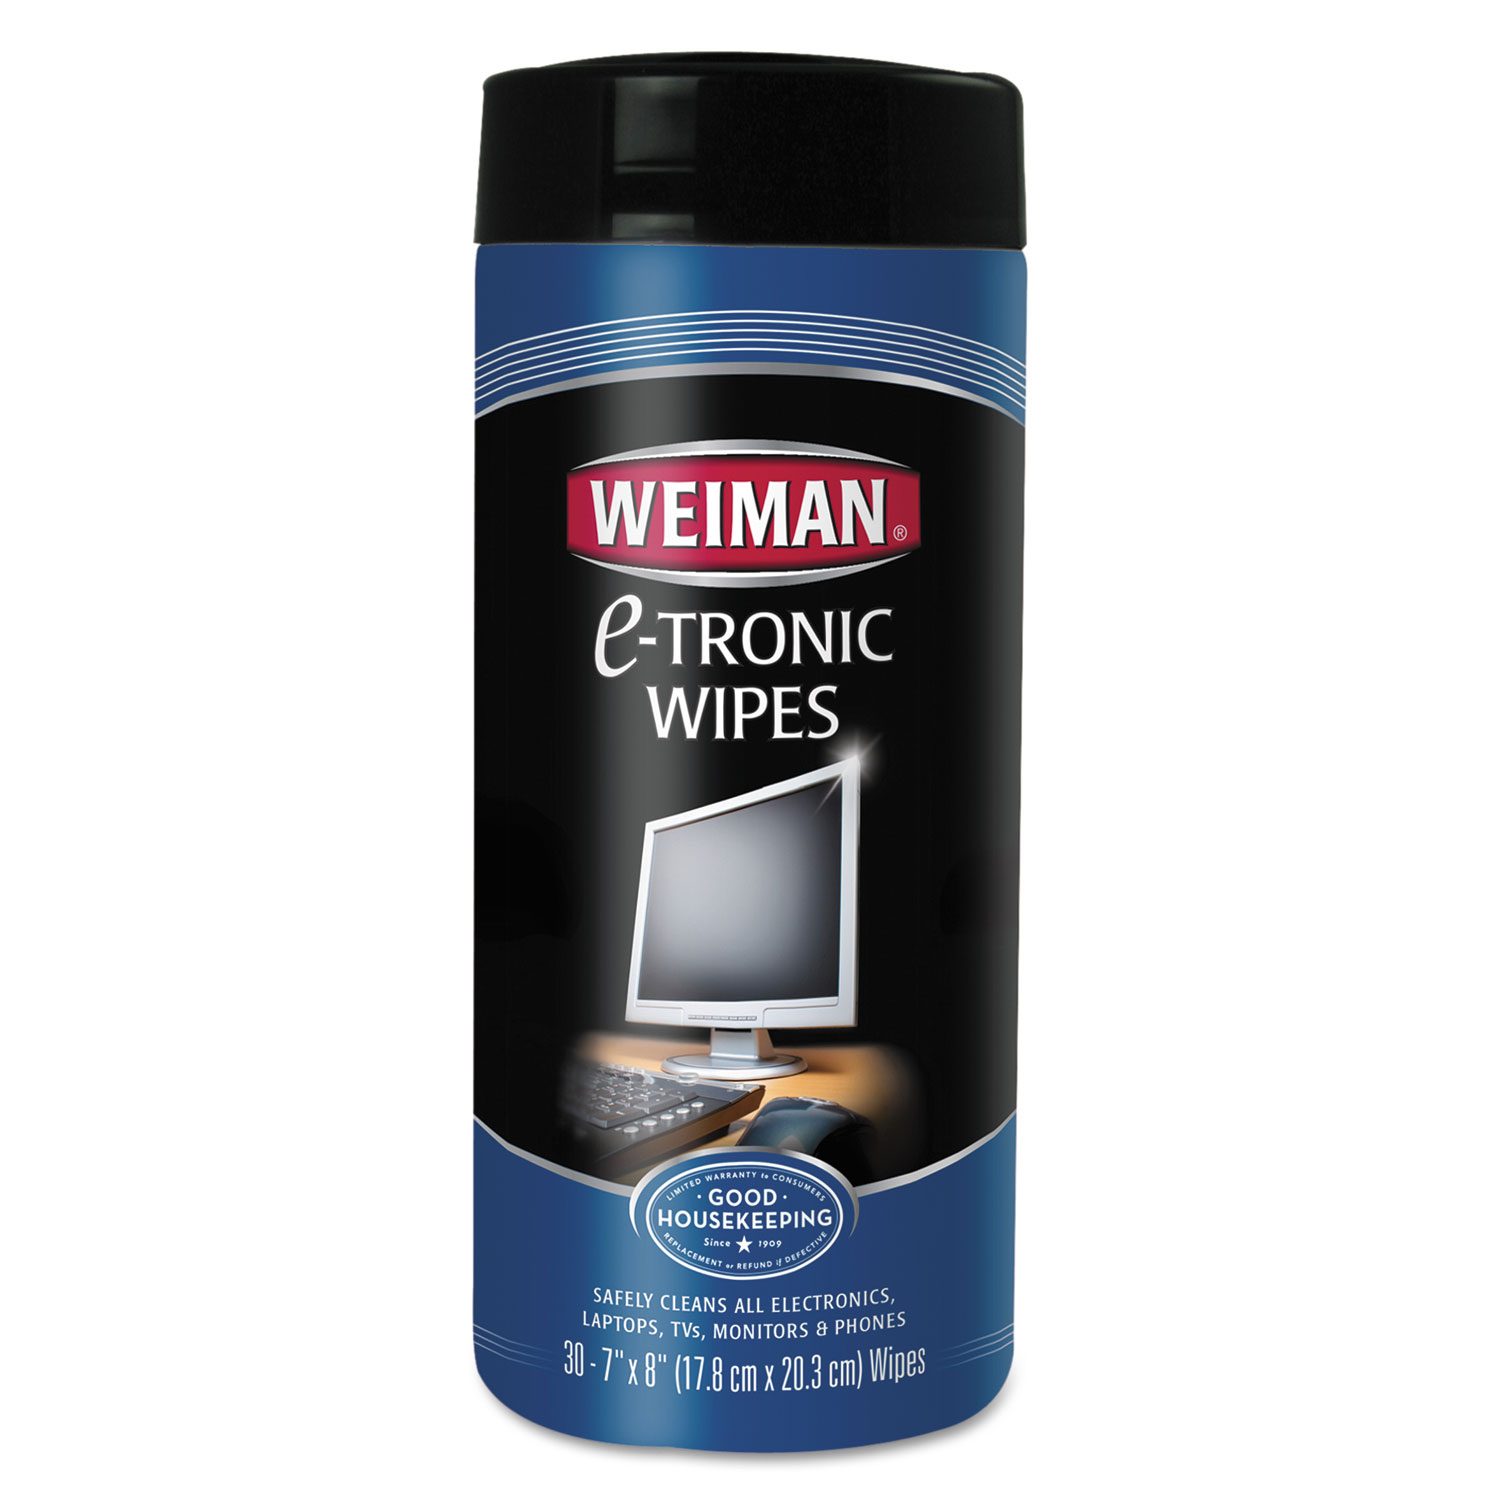  WEIMAN 93 E-tronic Wipes, 5 x 7, 30/Canister (WMN93) 